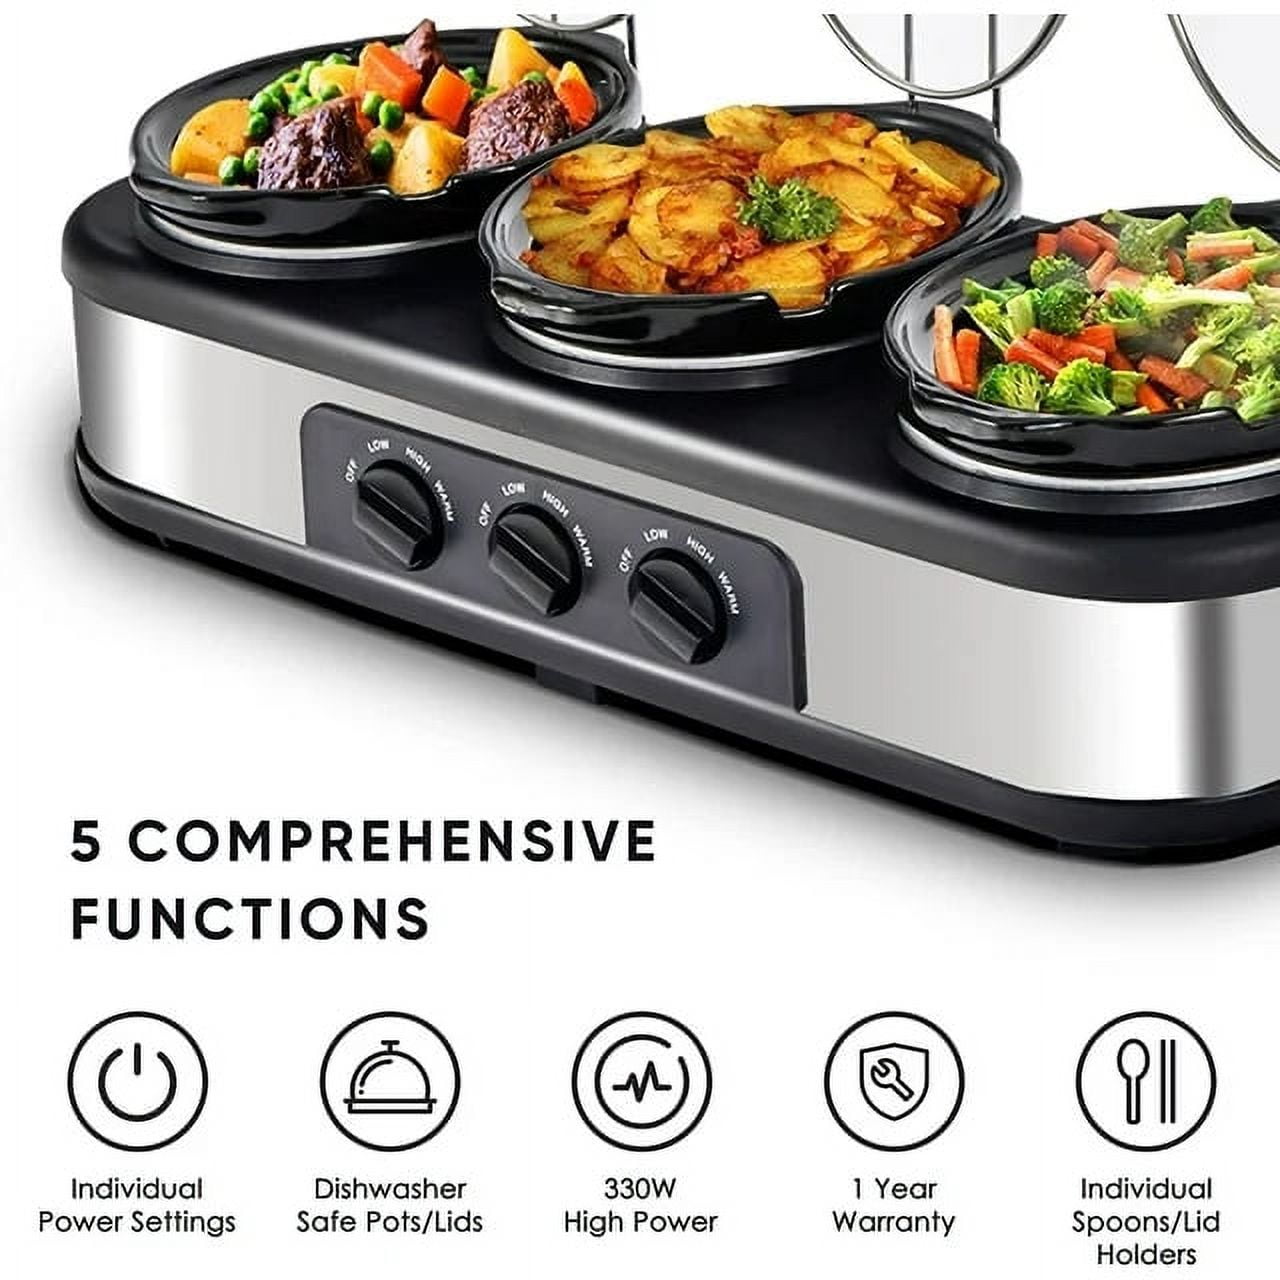  Triple Slow Cooker, 3×1.5 QT Buffet Servers and Warmers, 3 Pots  Buffet Slow Cooker Adjustable Temp Lid Rests Stainless Steel Manual Silver  for Parties Holidays Families: Home & Kitchen